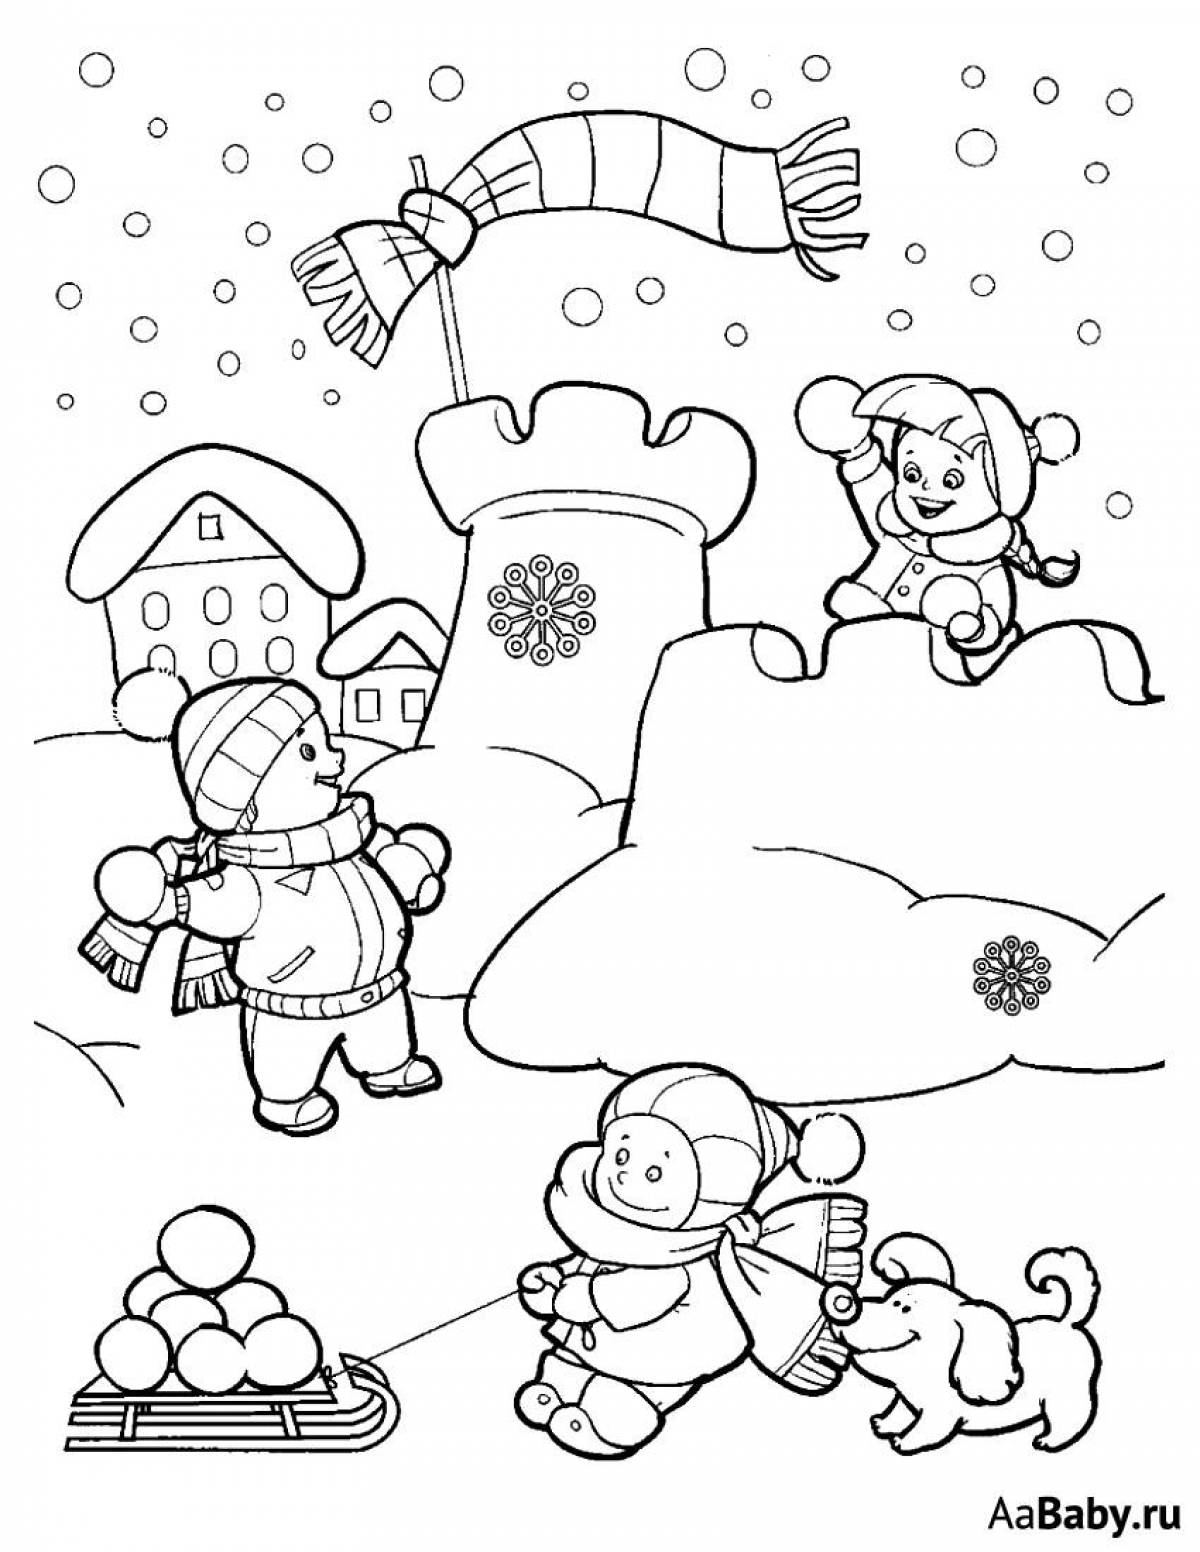 Glorious winter coloring book for children 5-6 years old